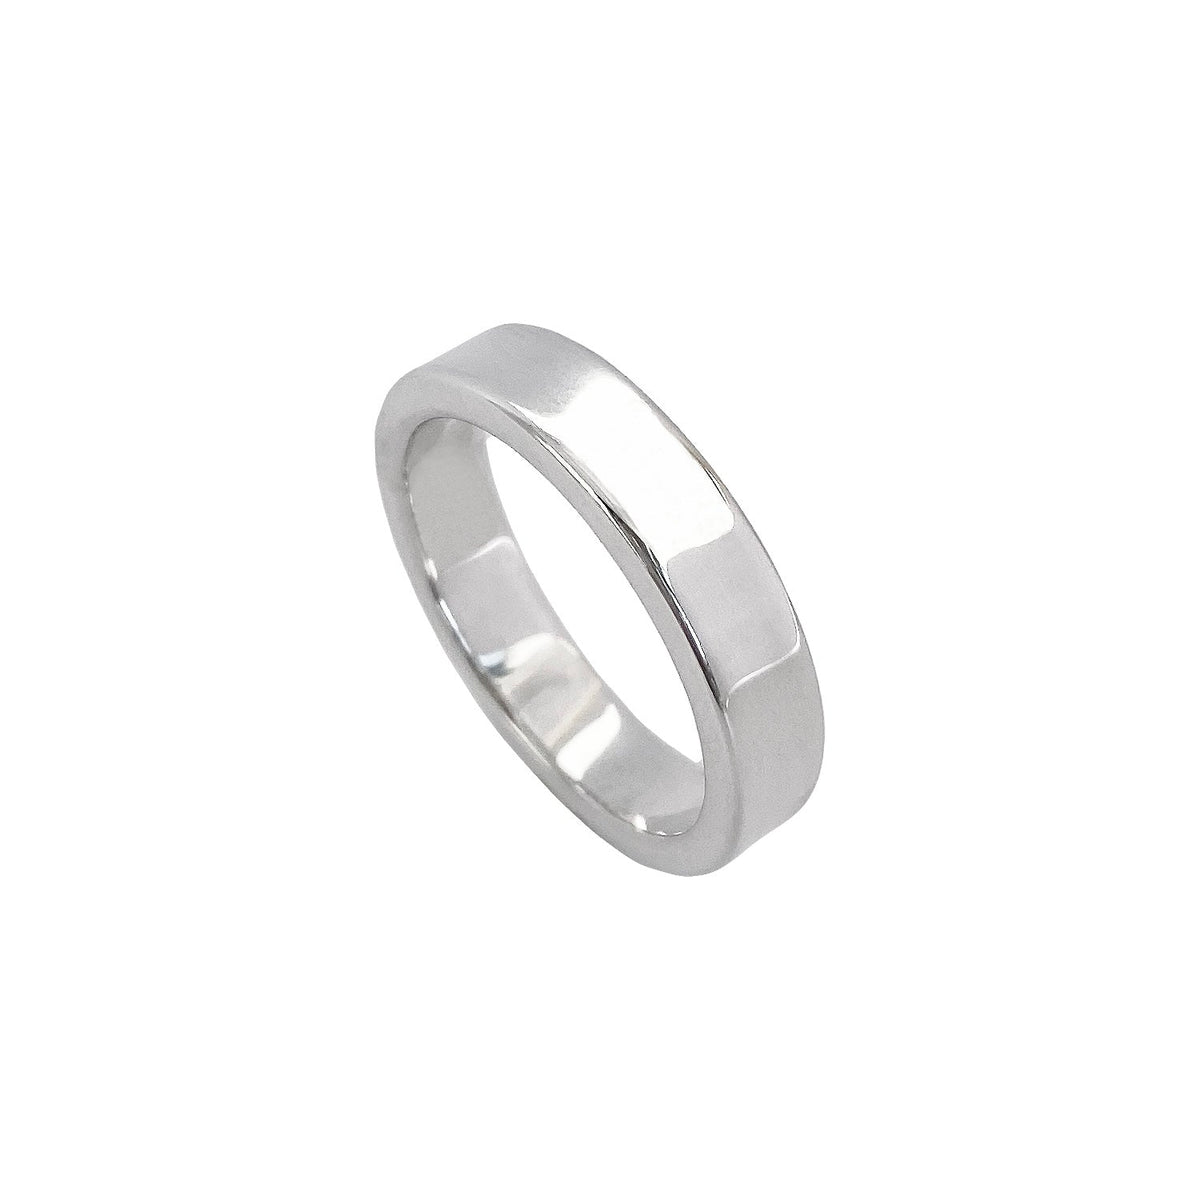 Wide stylish silver ring from Mila Silver. Buy online